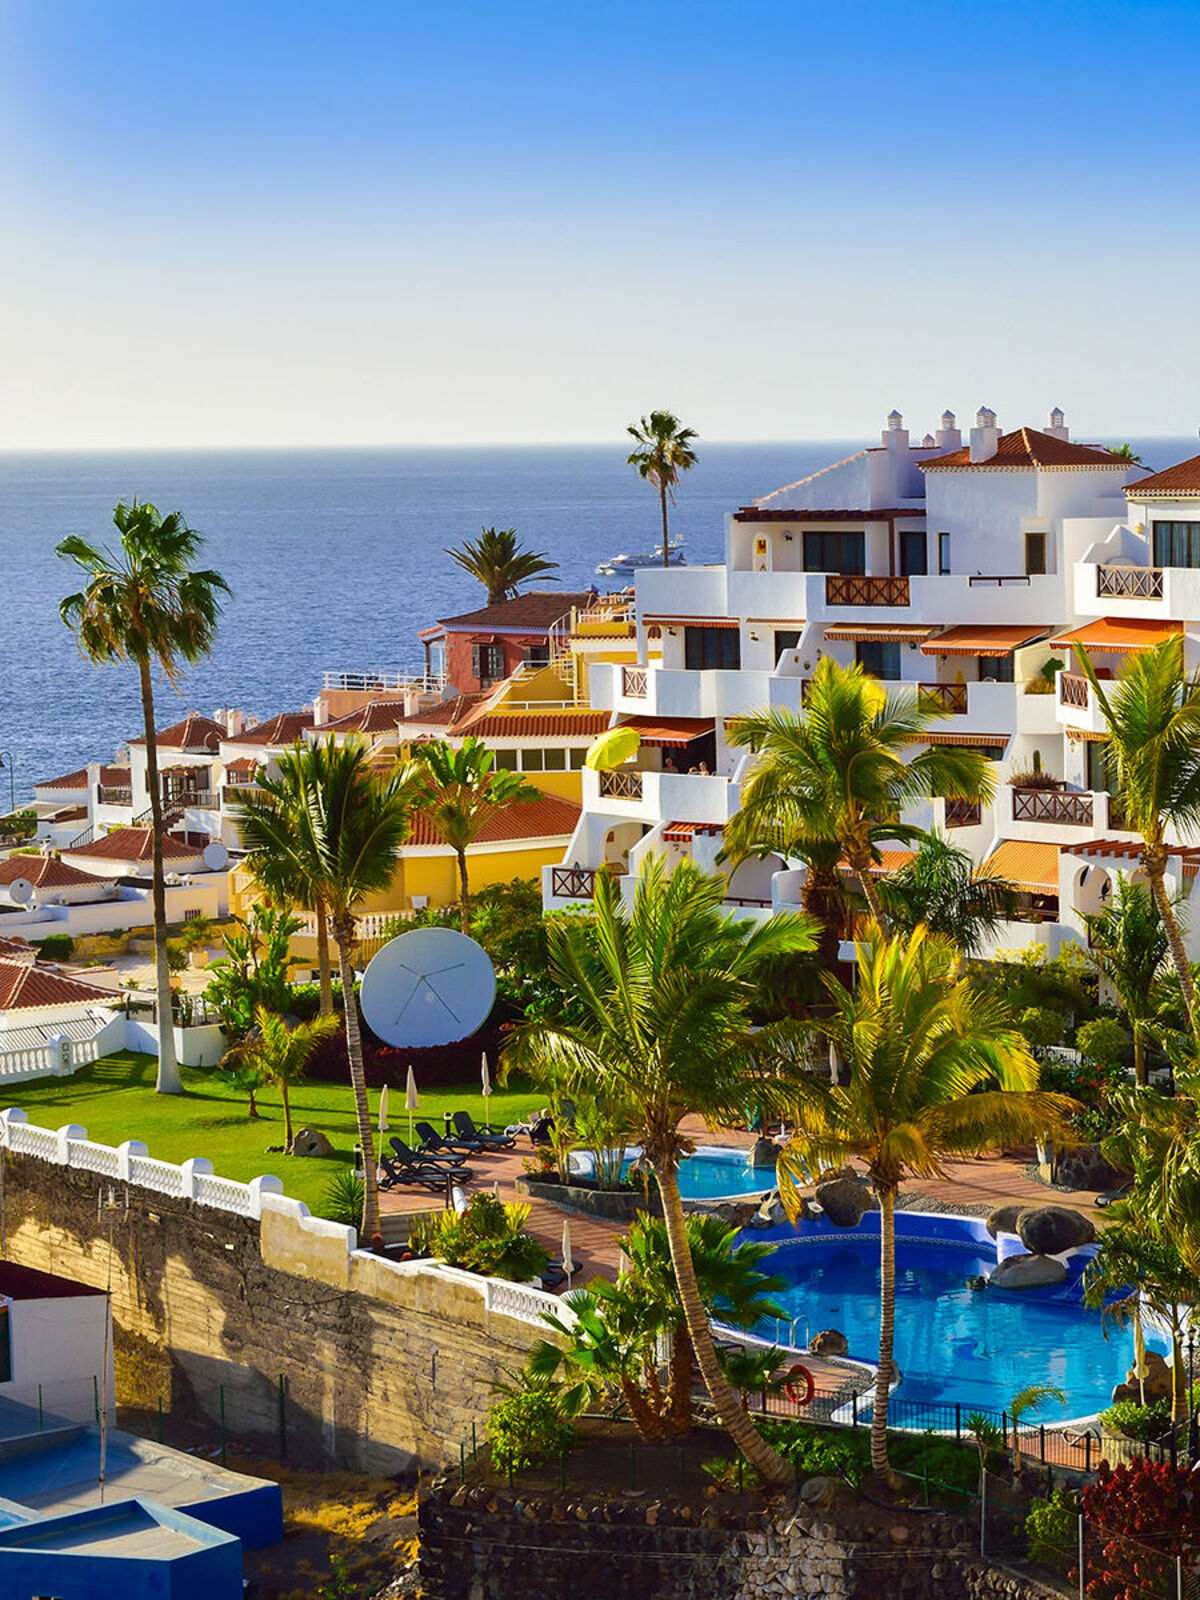 The Spanish property market: pre-COVID-19 levels by the end of 2021